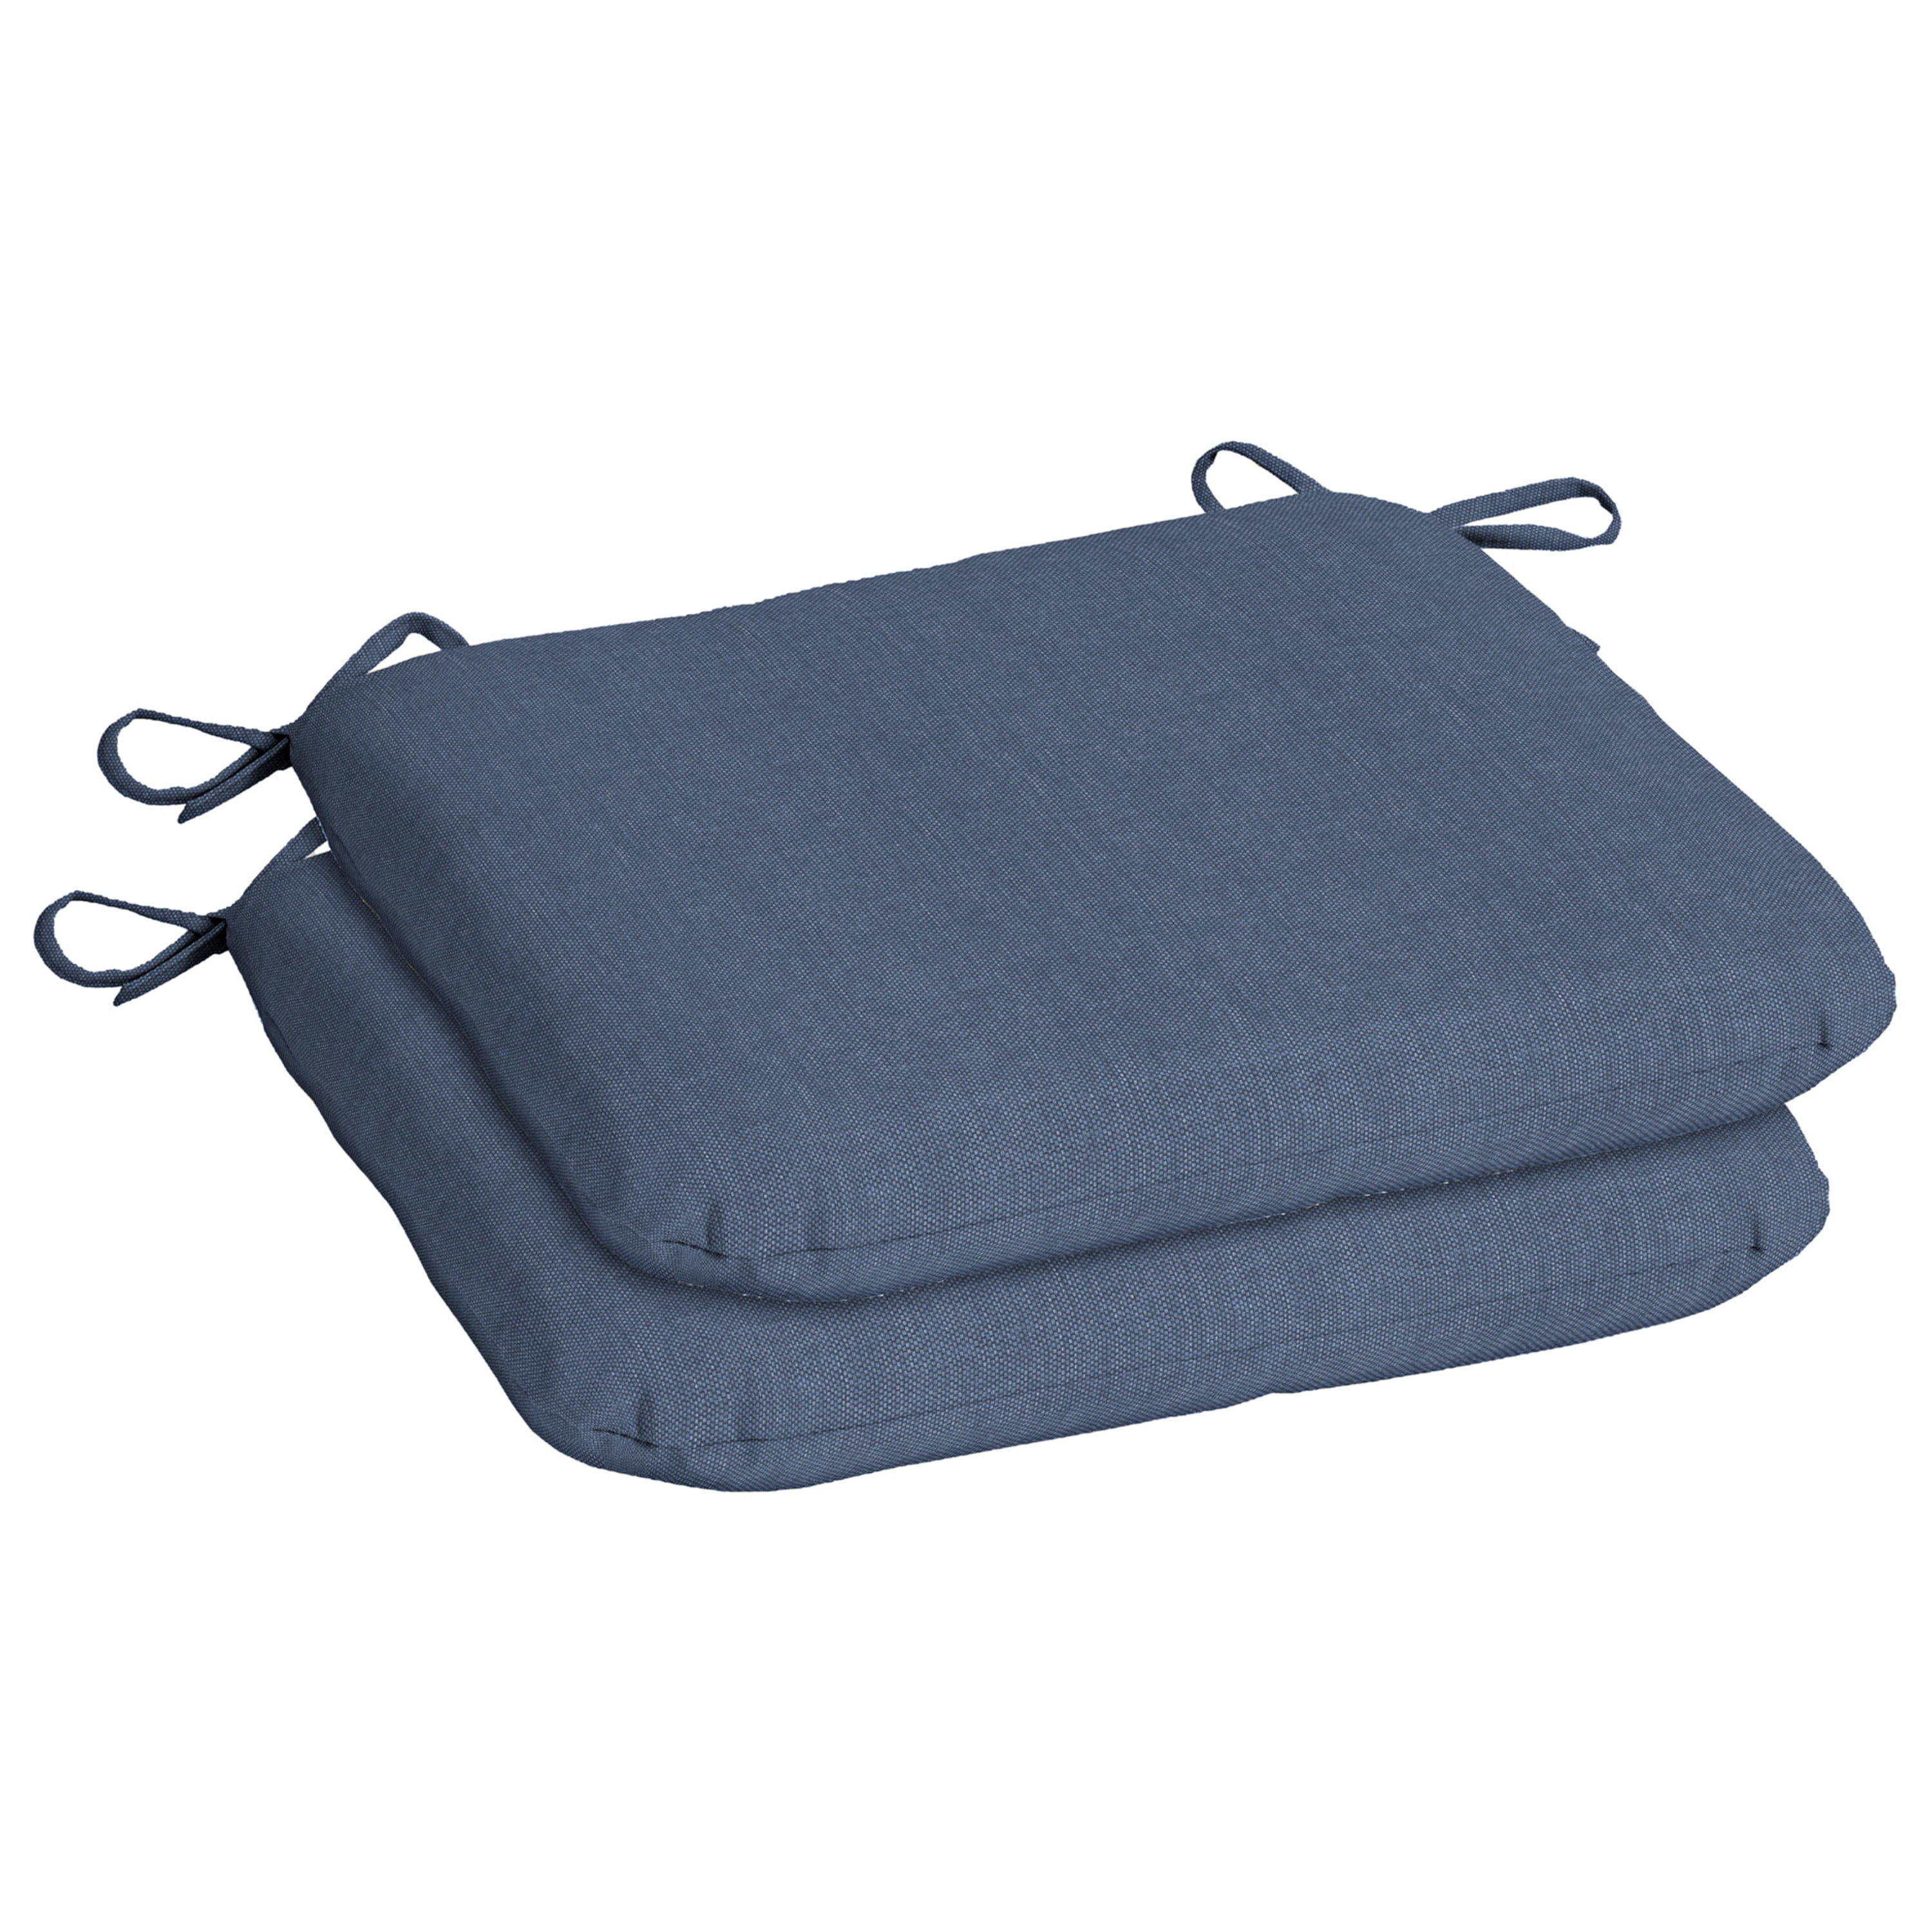 VOS 15 in. x 13 in. x 1 in. Pegasus Cushion Portable Kneeling/Sitting Pad  for Comfortable & TPE Foam Mat(Capri Blue, 2-Pack) VOS-501 - The Home Depot